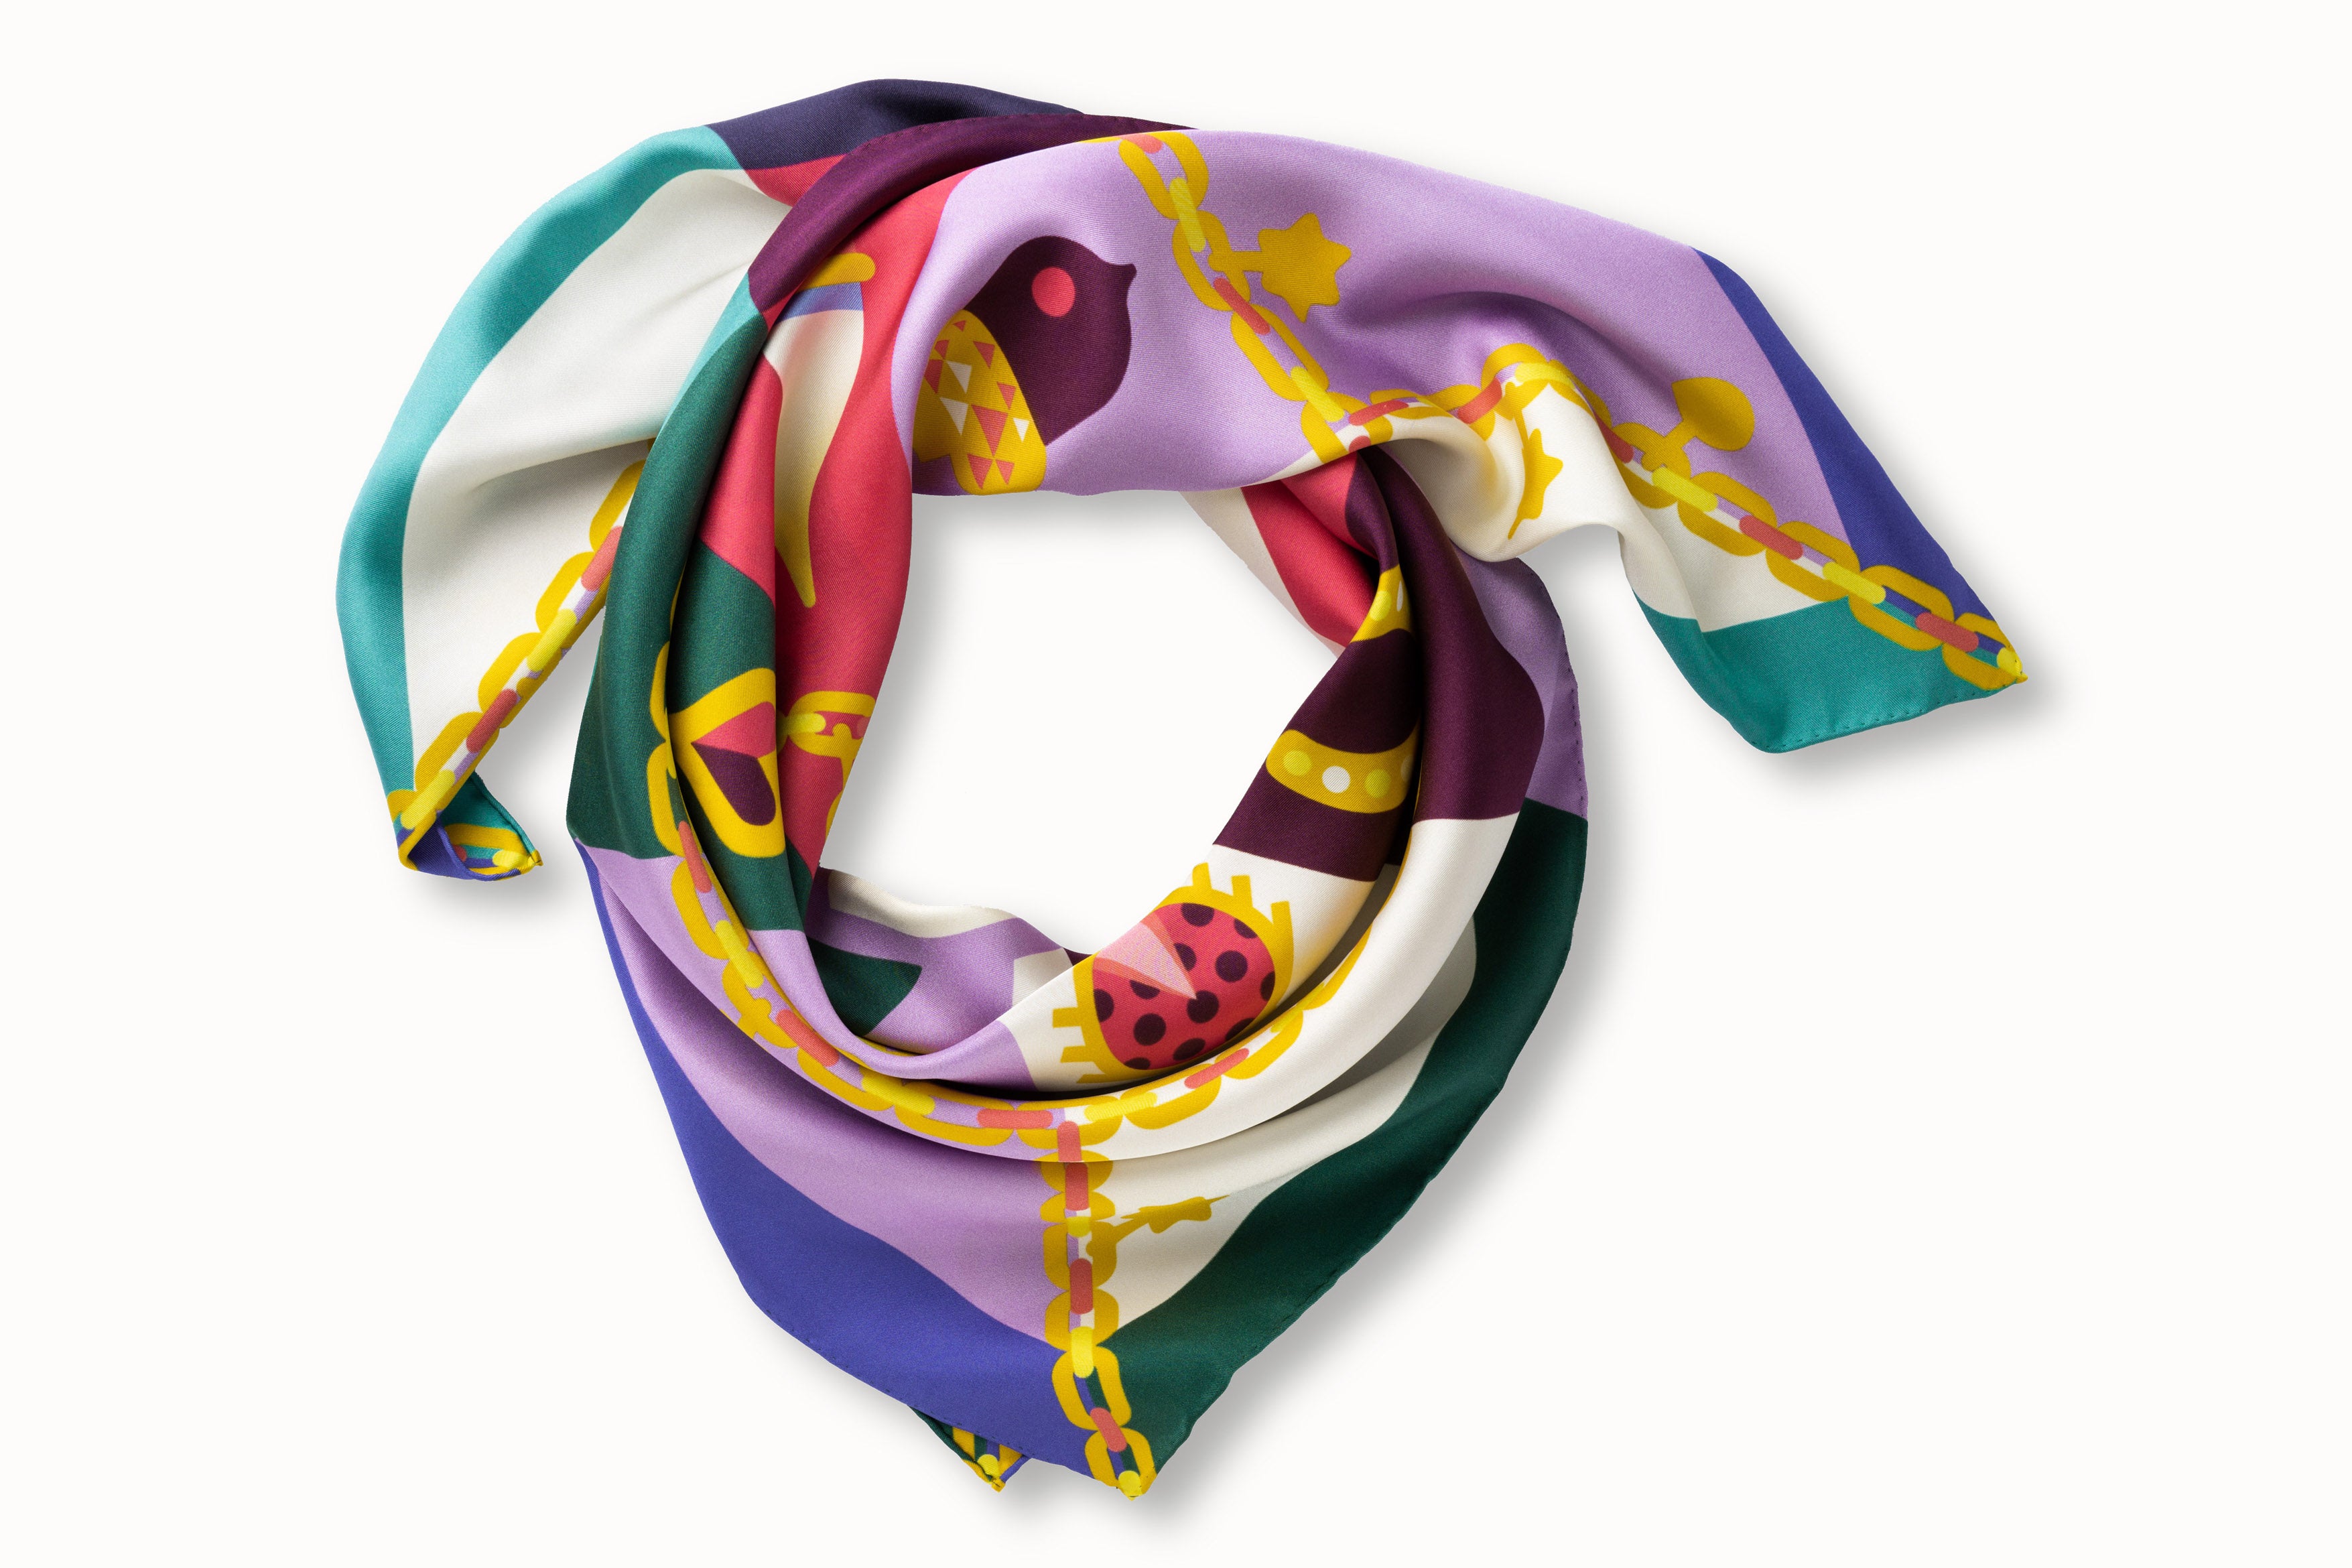 Rolled image of 100% silk square scarf featuring a motif of jewel toned good luck charms such as ladybugs, horseshoes, four leaf clovers, wishbones on a large gold chain with the evil eye symbol at the center.